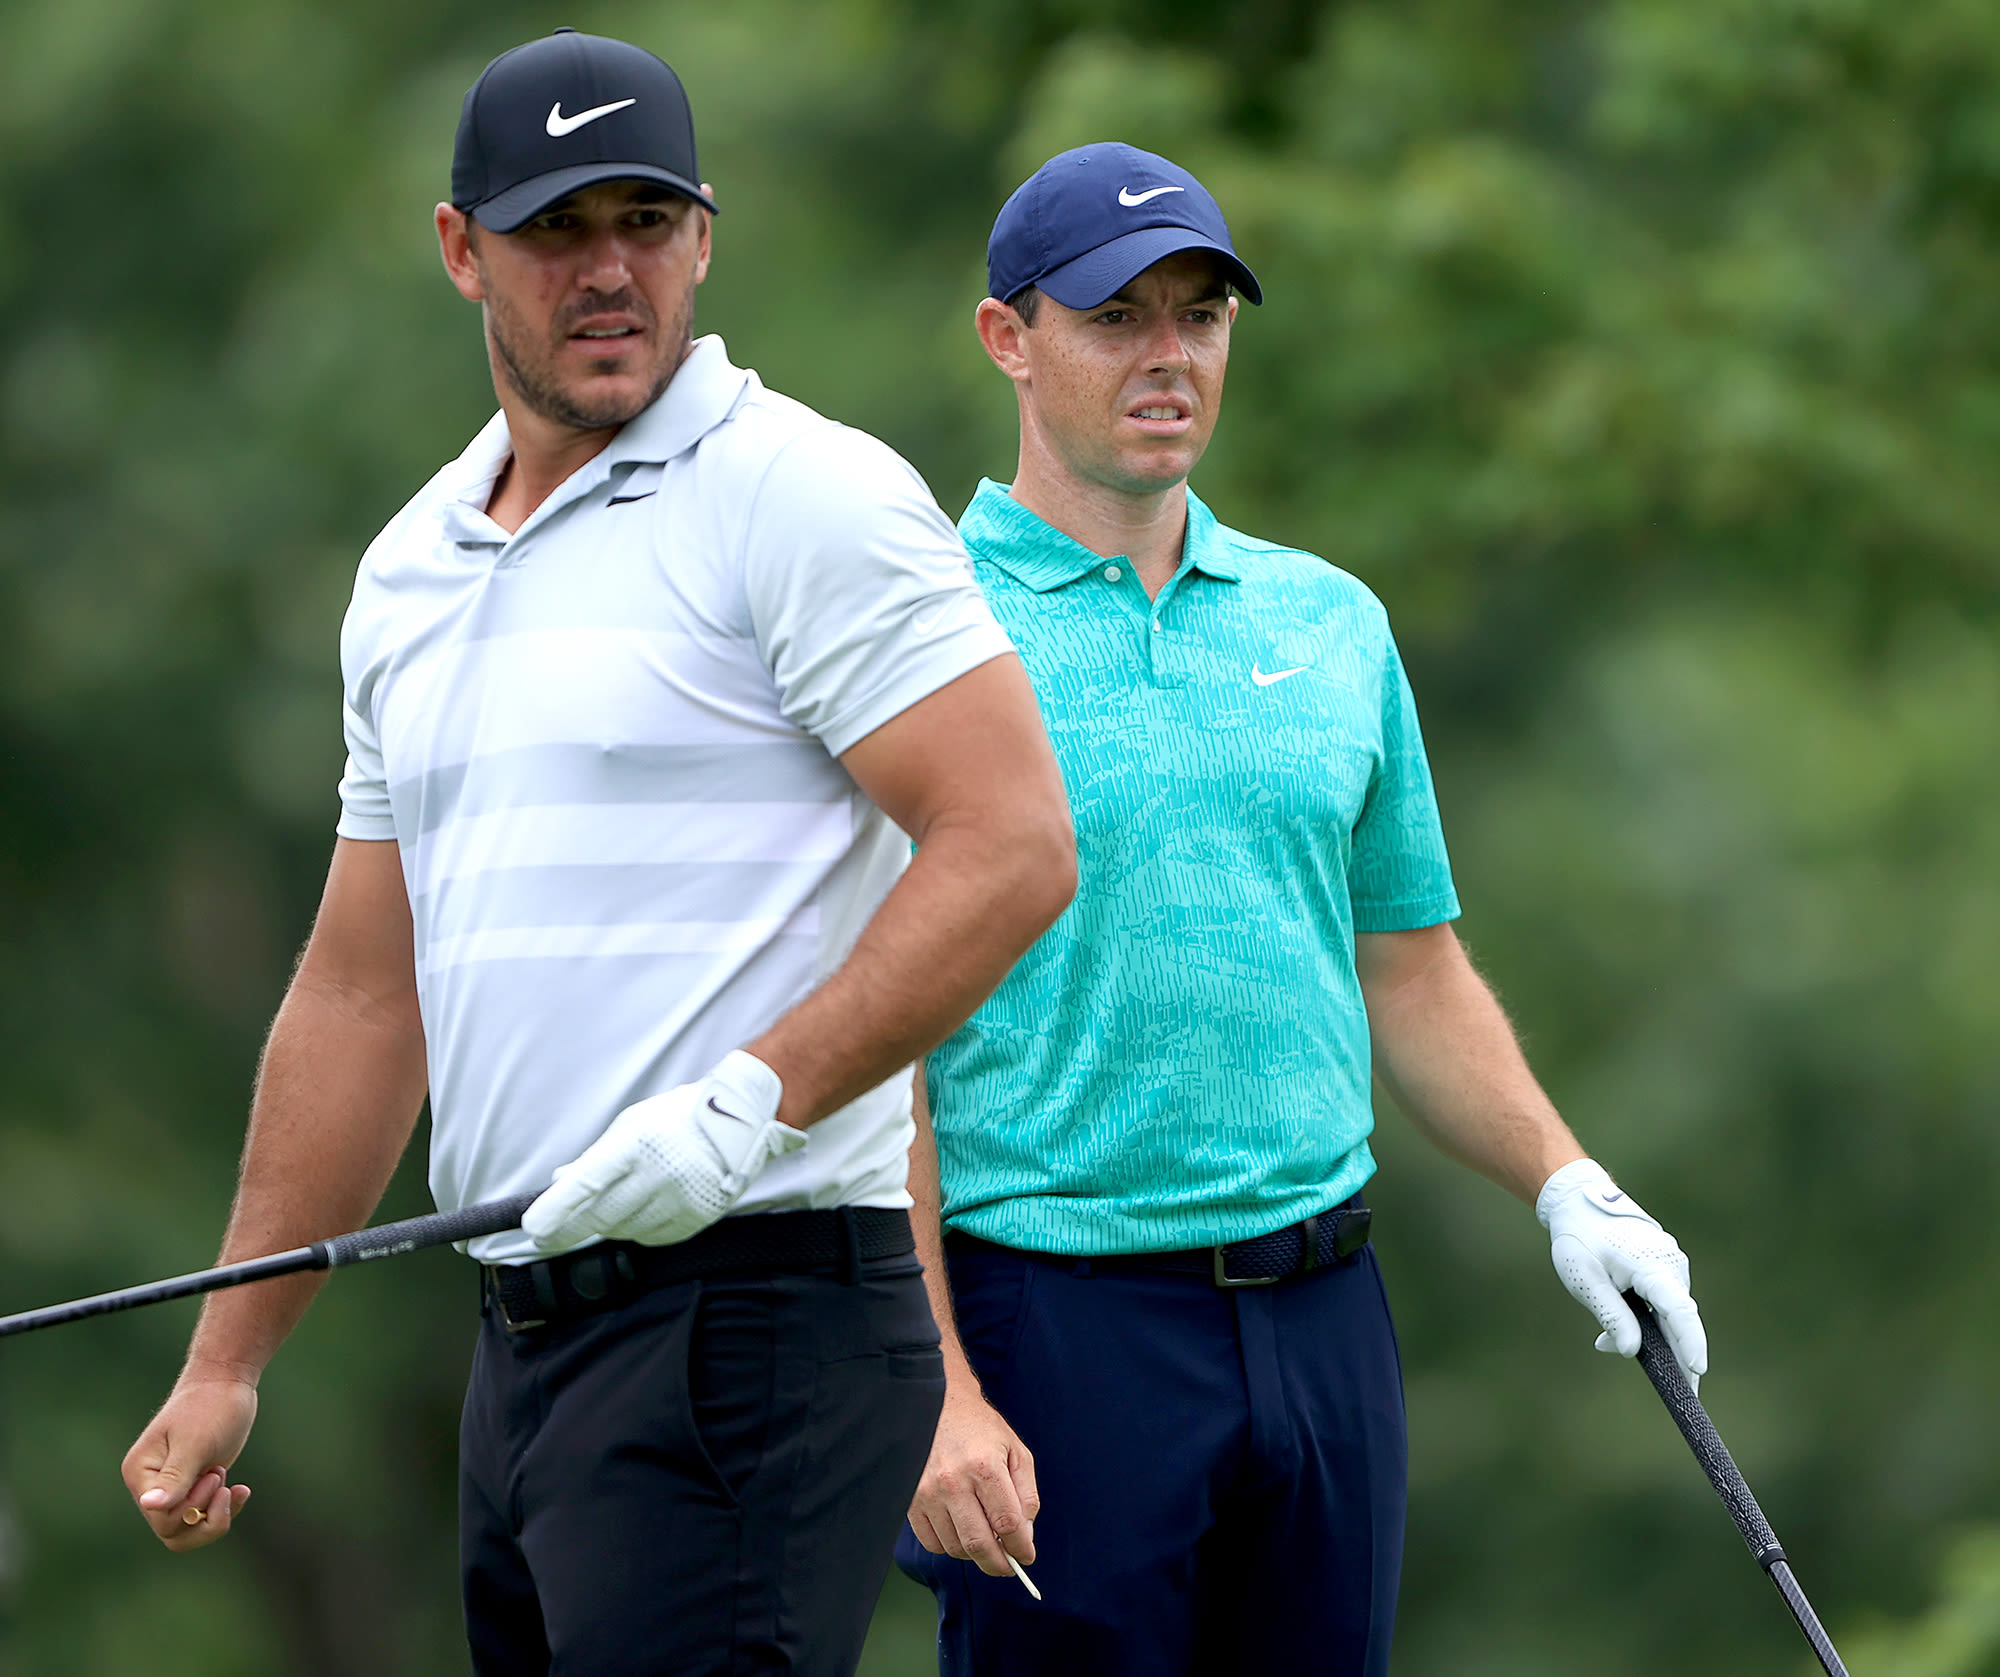 Brooks Koepka’s Post About Wife Jena Likely Wasn’t the Dig at Rory McIlroy Fans Made It Out to Be